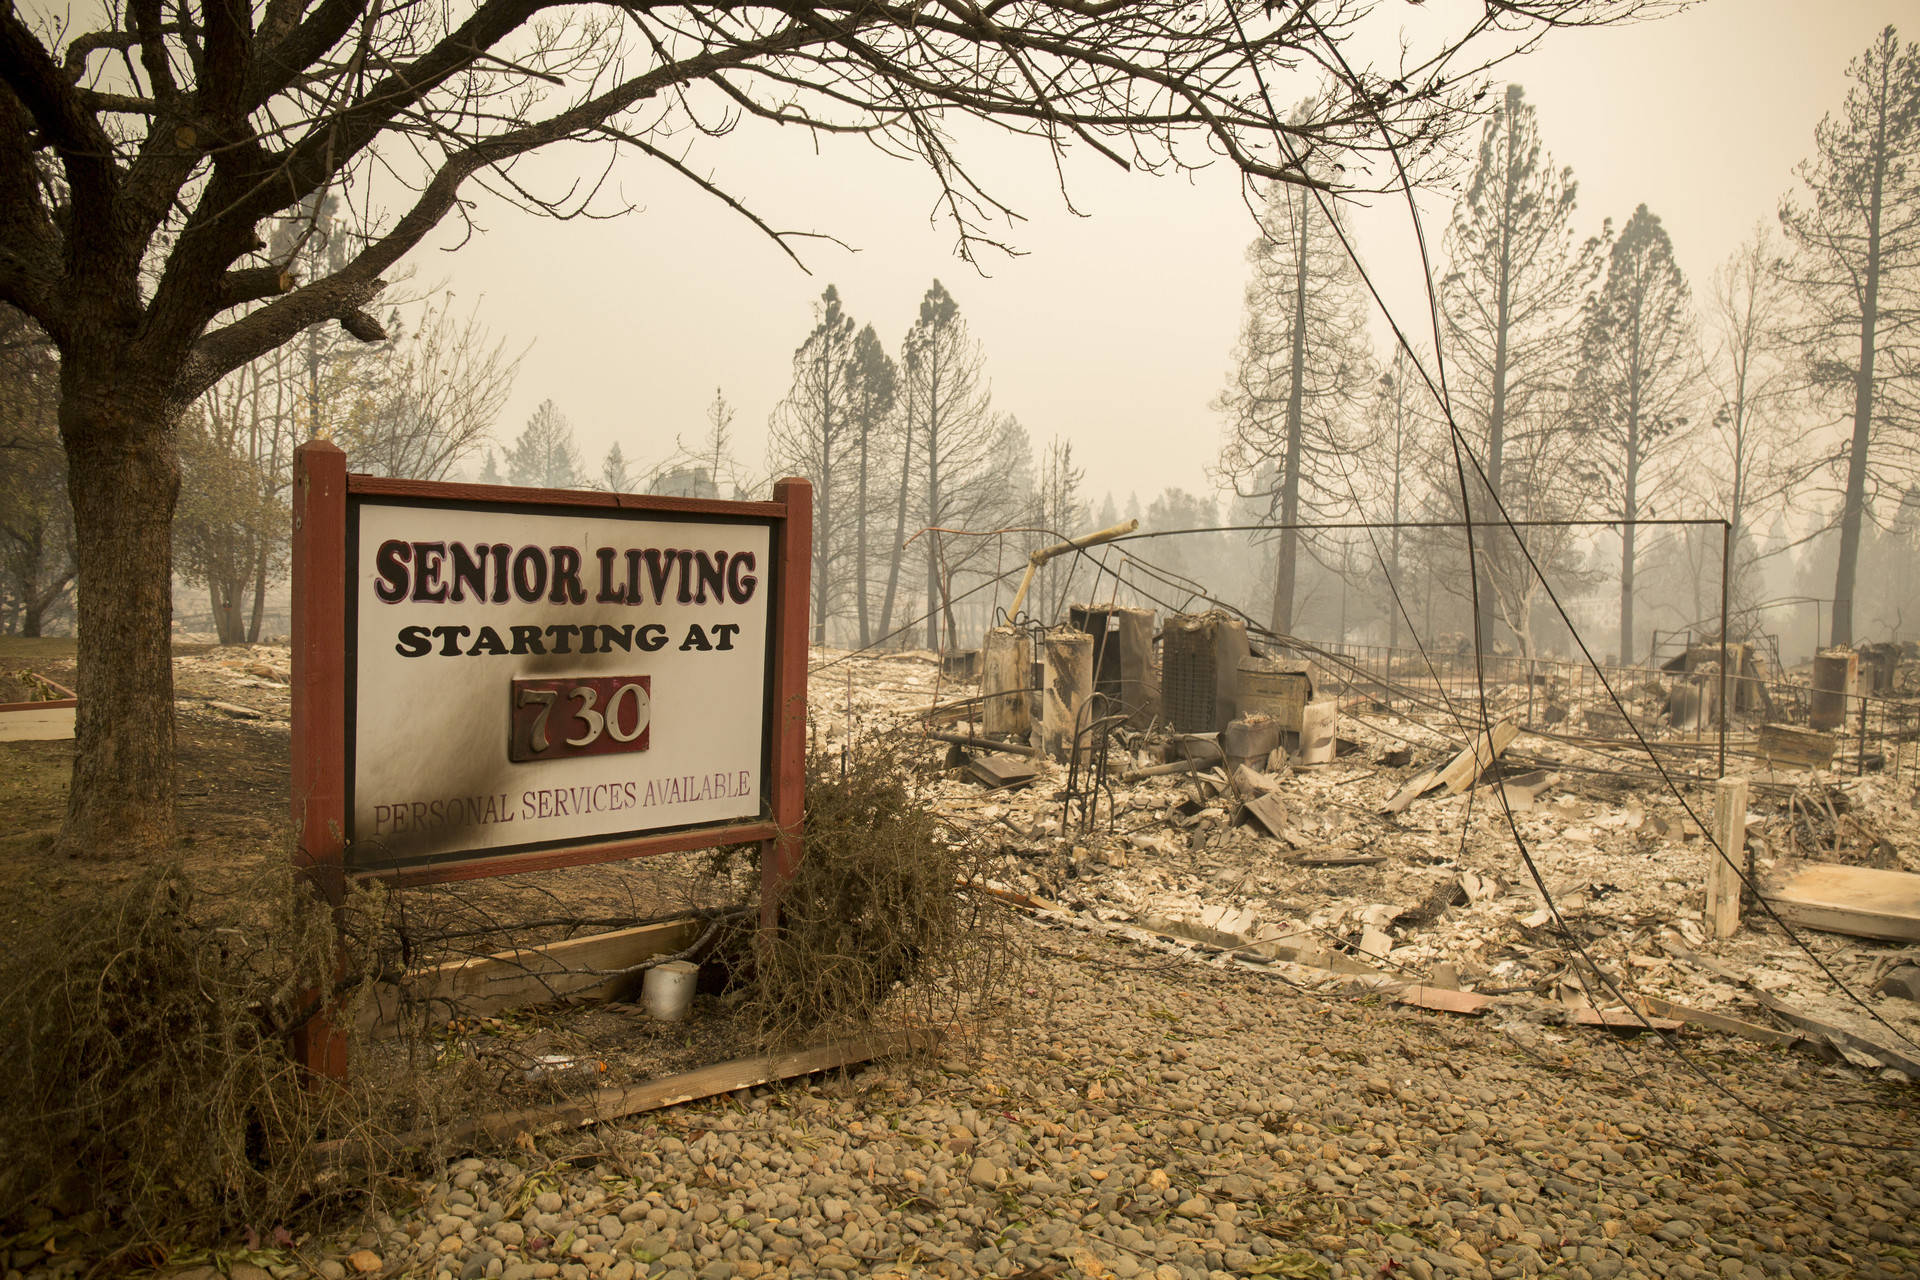 Paradise Gardens senior living facility was destroyed by the deadly Camp Fire in Butte County.   Anne Wernikoff/KQED